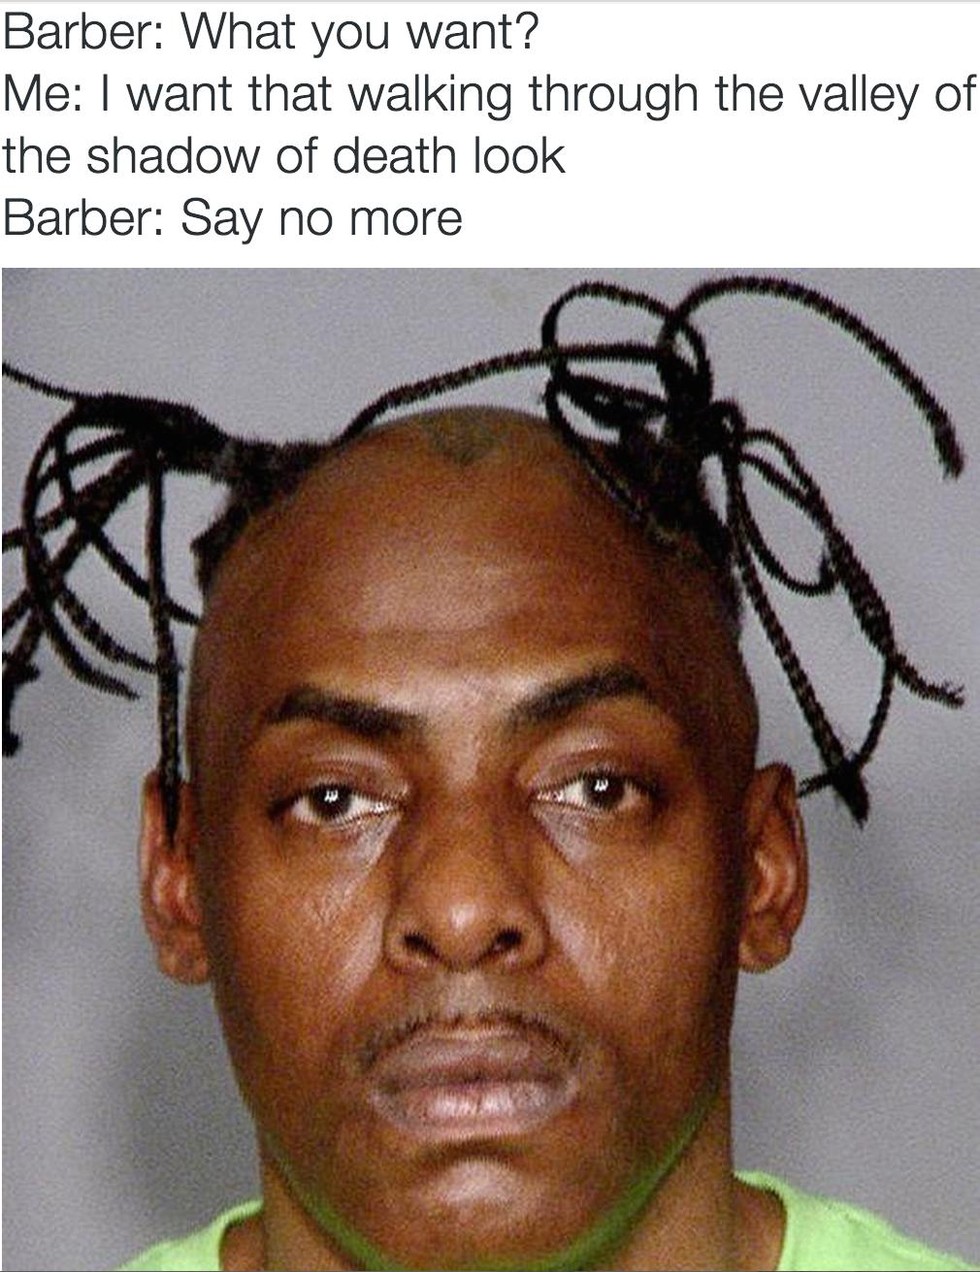 coolio son - Barber What you want? Me I want that walking through the valley of the shadow of death look Barber Say no more